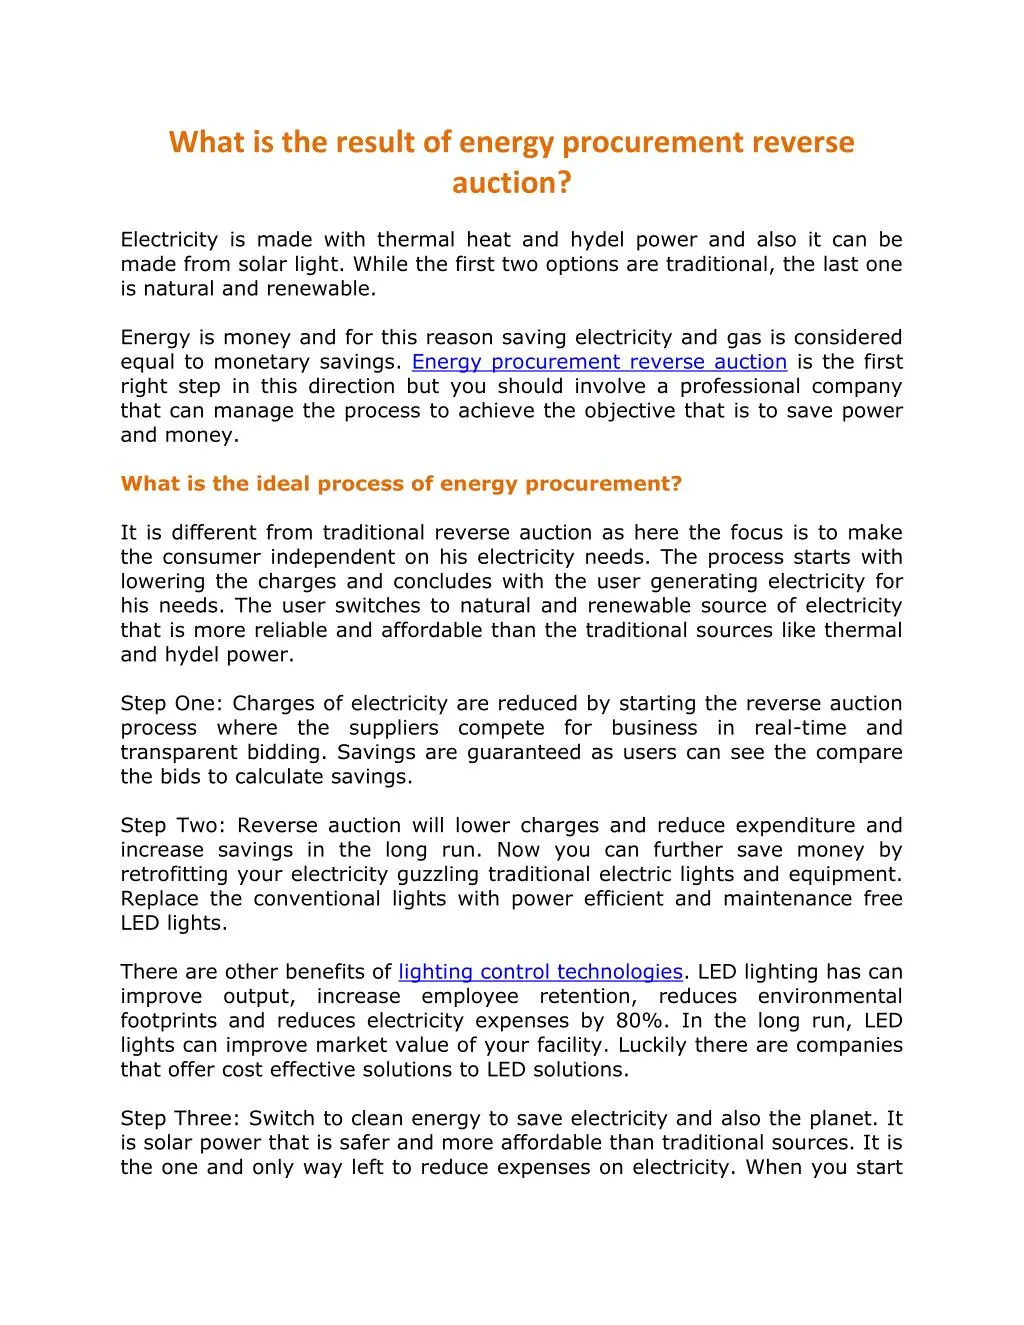 what is the result of energy procurement reverse